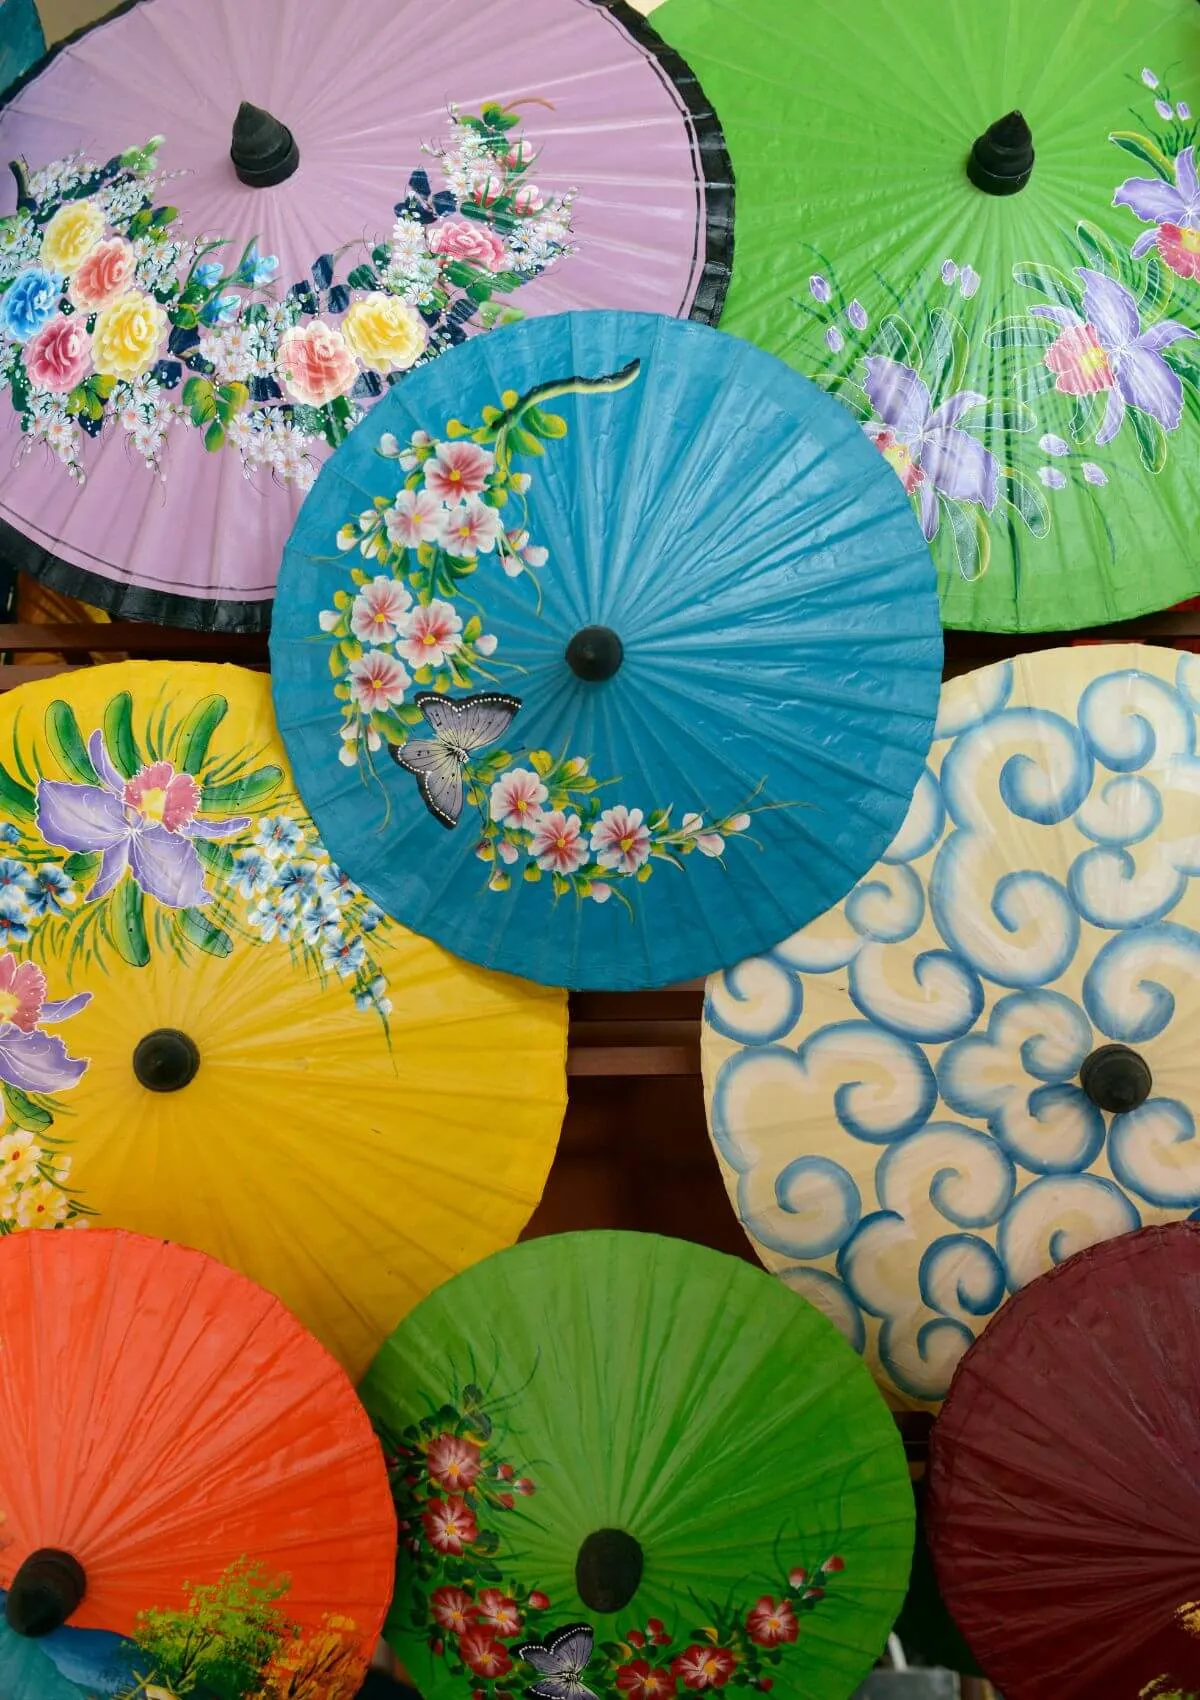 Traditional umbrellas make for practical souvenirs from Thailand